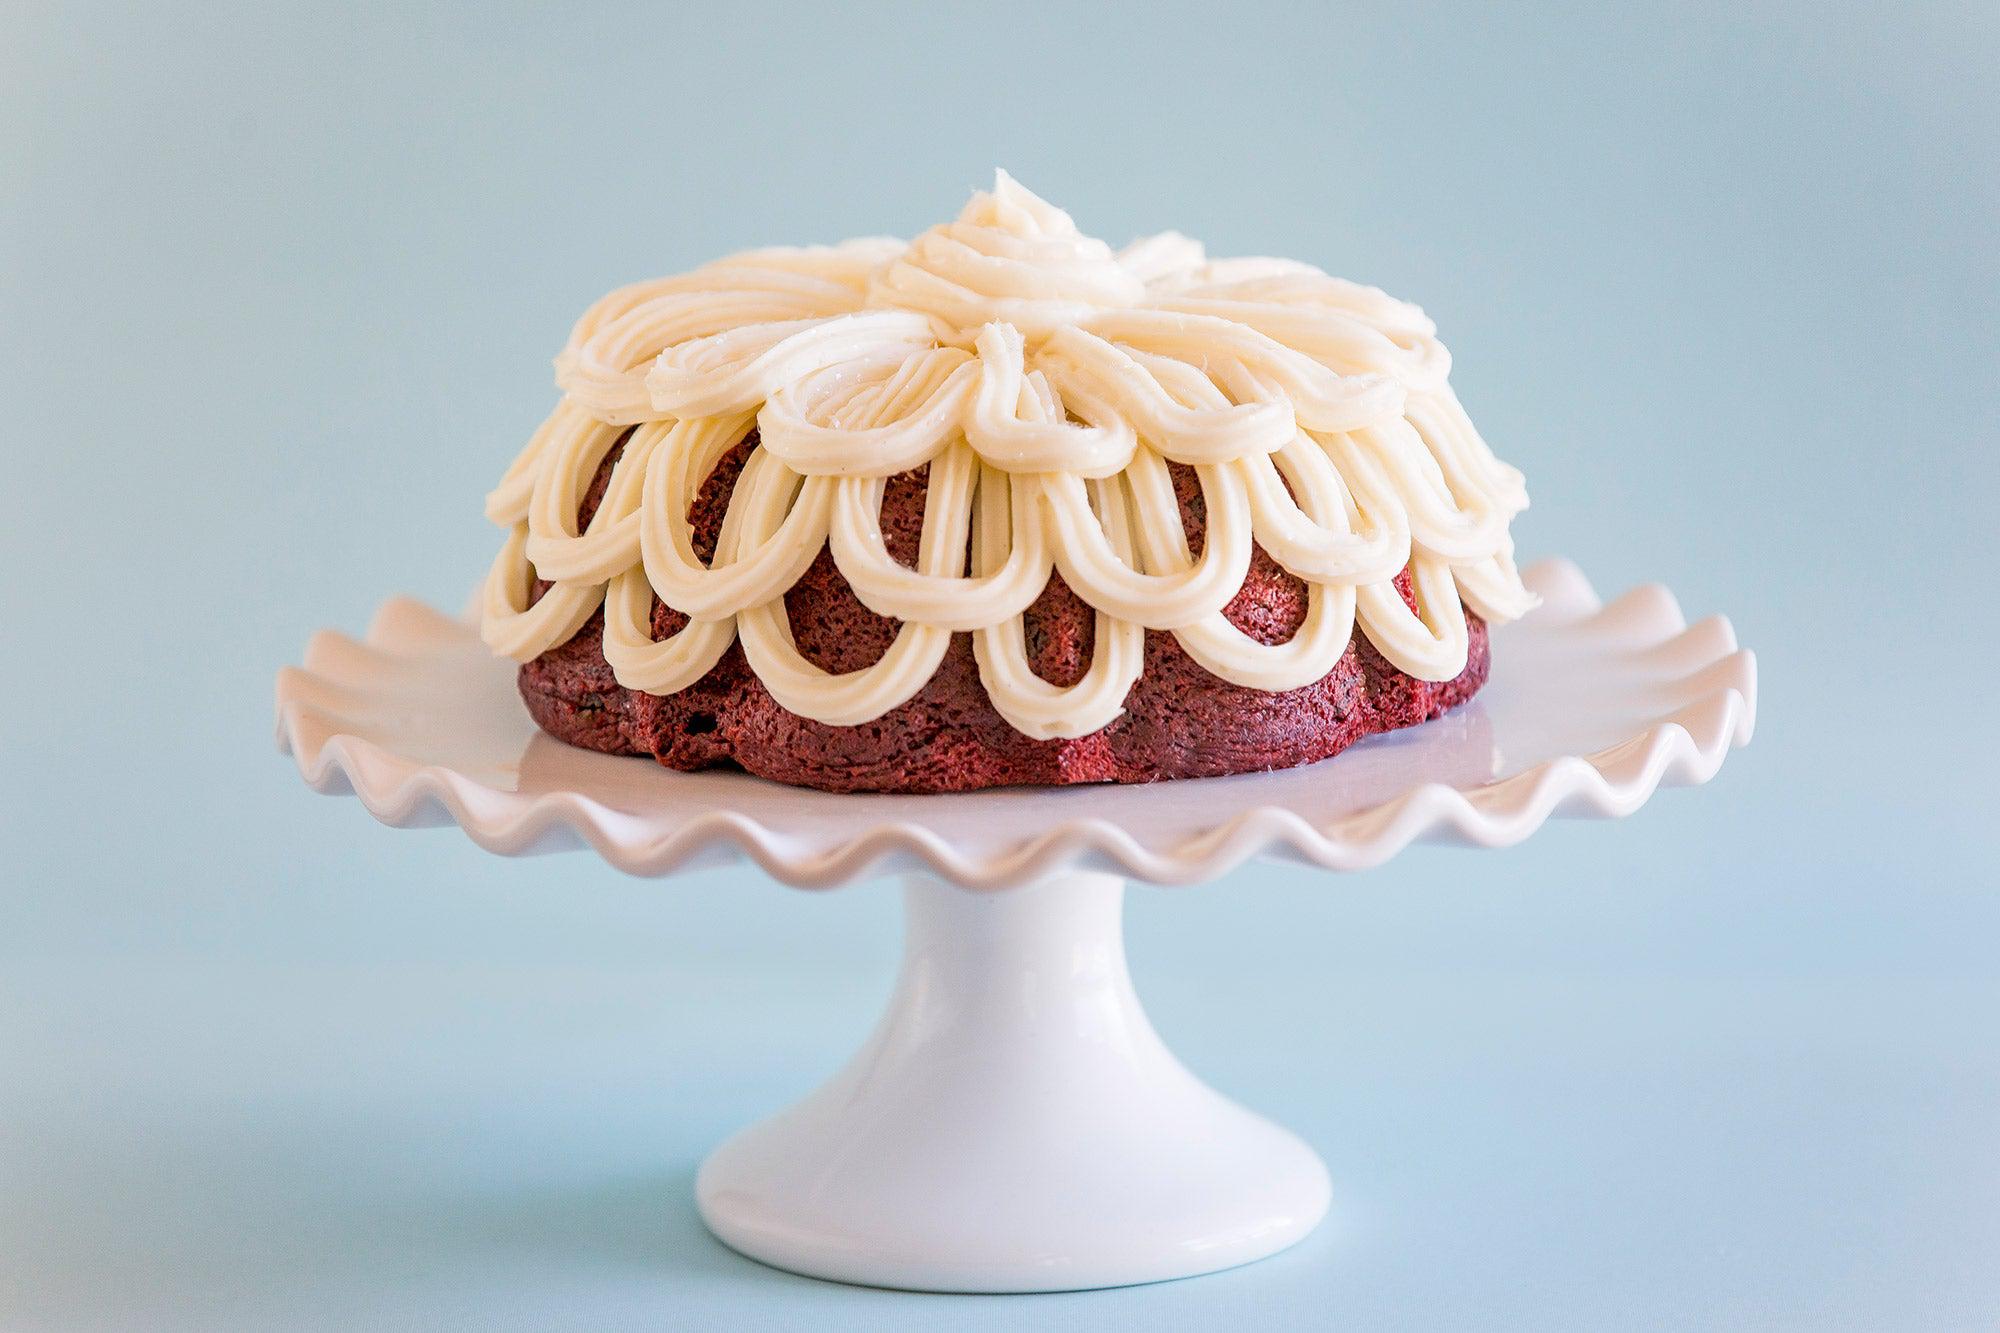 The ultimate dessert experience with our decadent Gluten-free Red Velvet Bundt cake. Infused with rich chocolate chips and topped with a luscious cream cheese buttery frosting, this treat is sure to satisfy your sweet cravings. Order now and treat yourself to a slice of pure heaven!